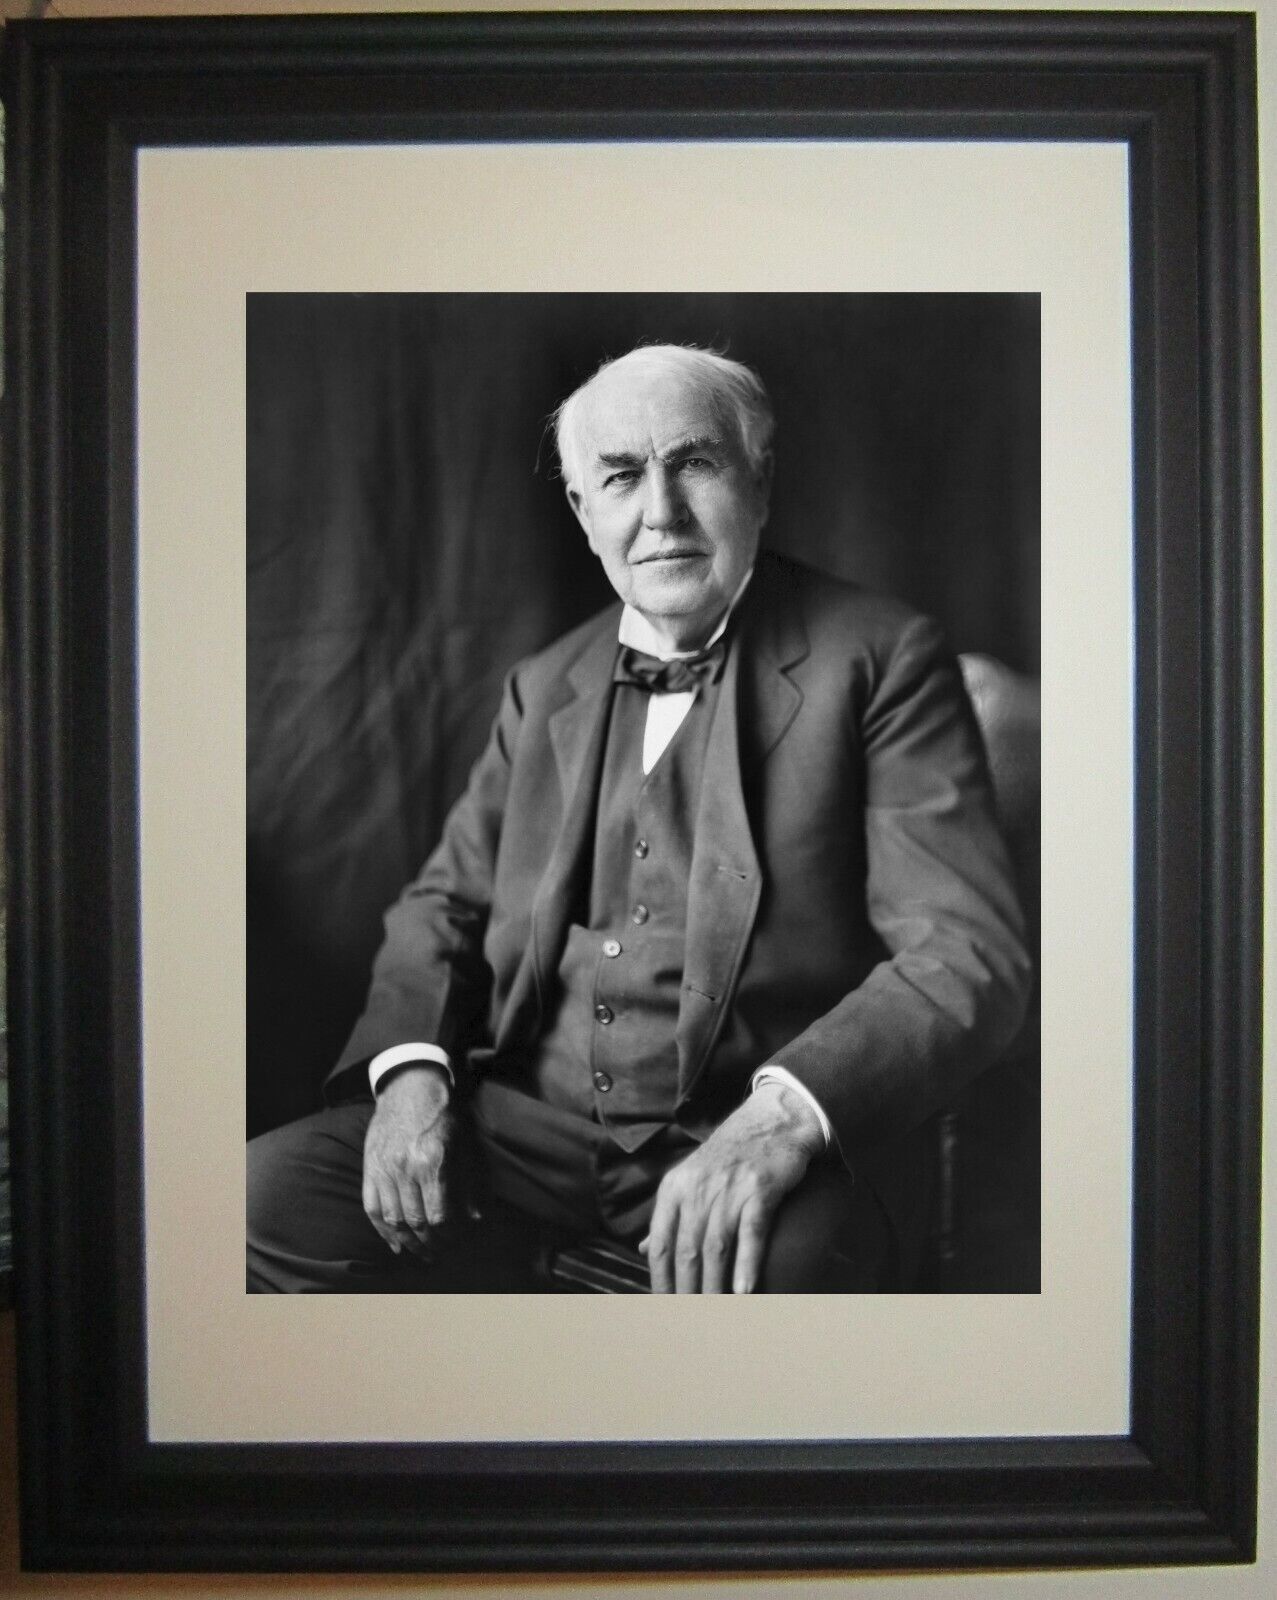 Thomas Edison Famous Inventor Engineer Framed Matted Photo Picture Photograph a